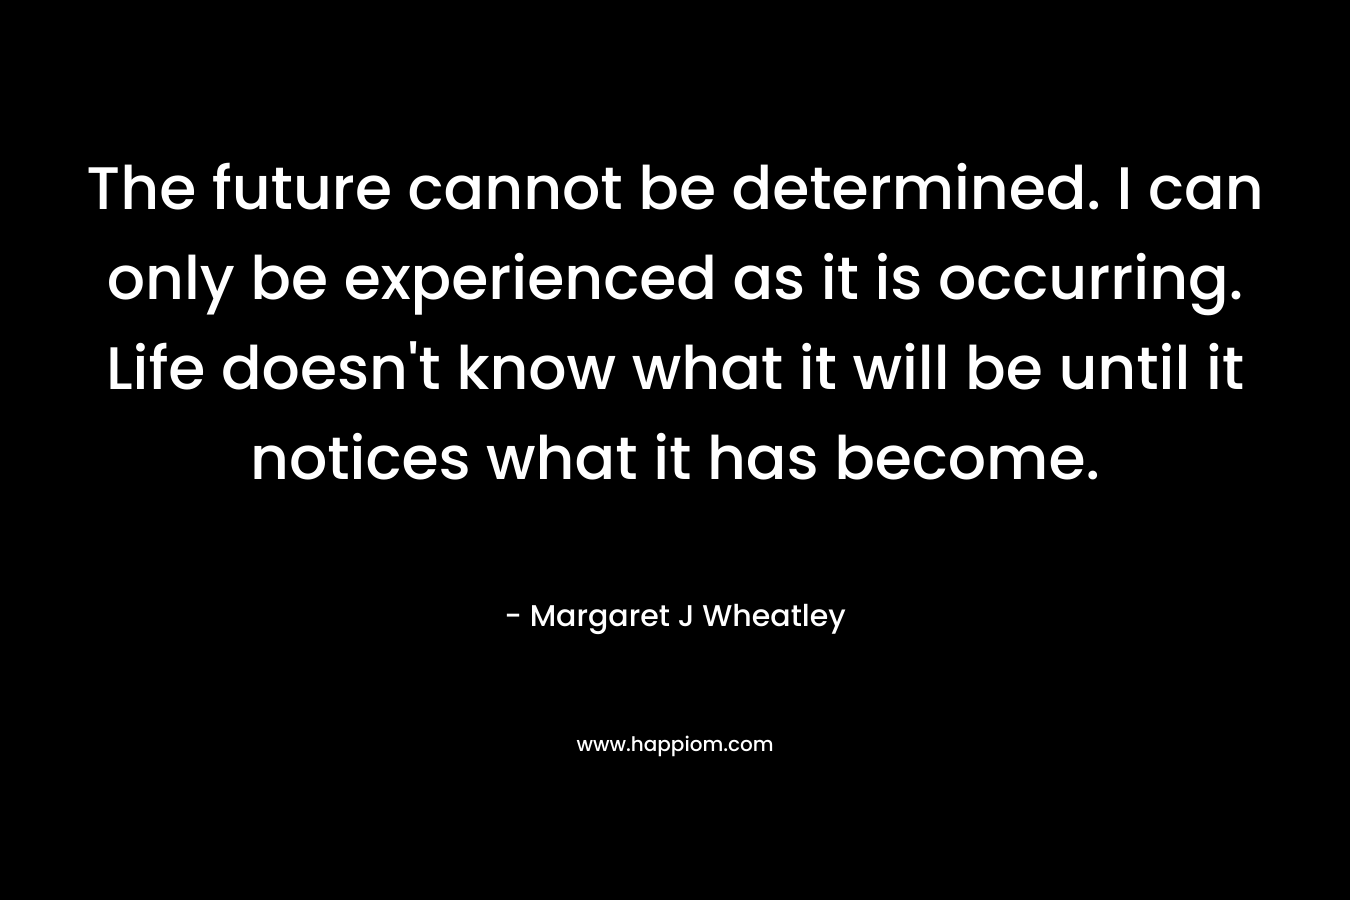 The future cannot be determined. I can only be experienced as it is occurring. Life doesn't know what it will be until it notices what it has become.